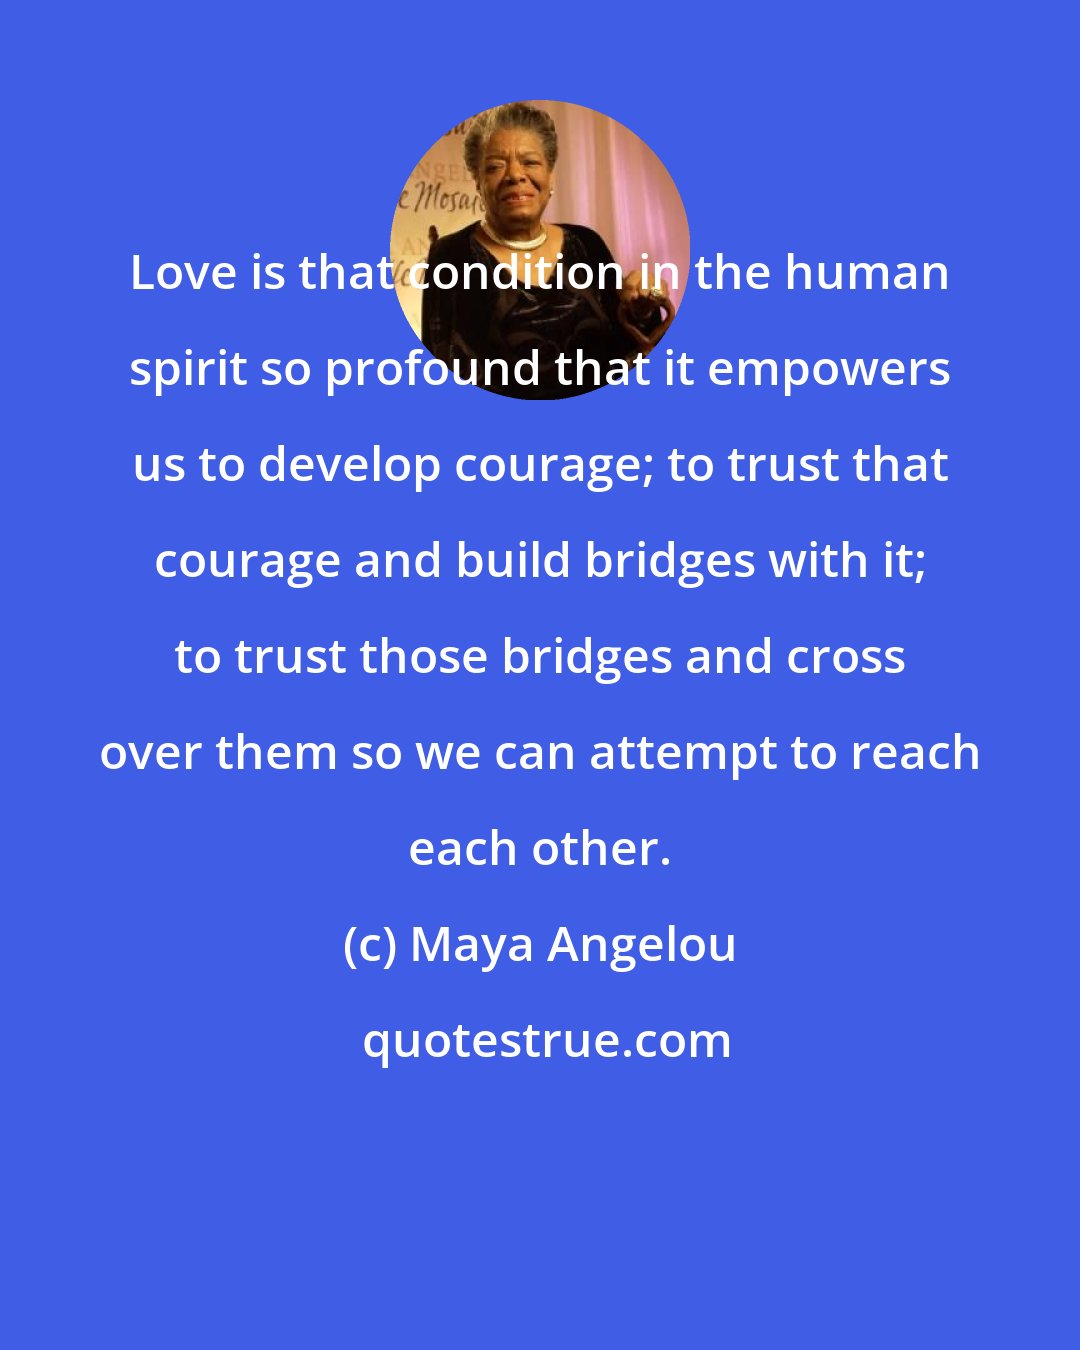 Maya Angelou: Love is that condition in the human spirit so profound that it empowers us to develop courage; to trust that courage and build bridges with it; to trust those bridges and cross over them so we can attempt to reach each other.